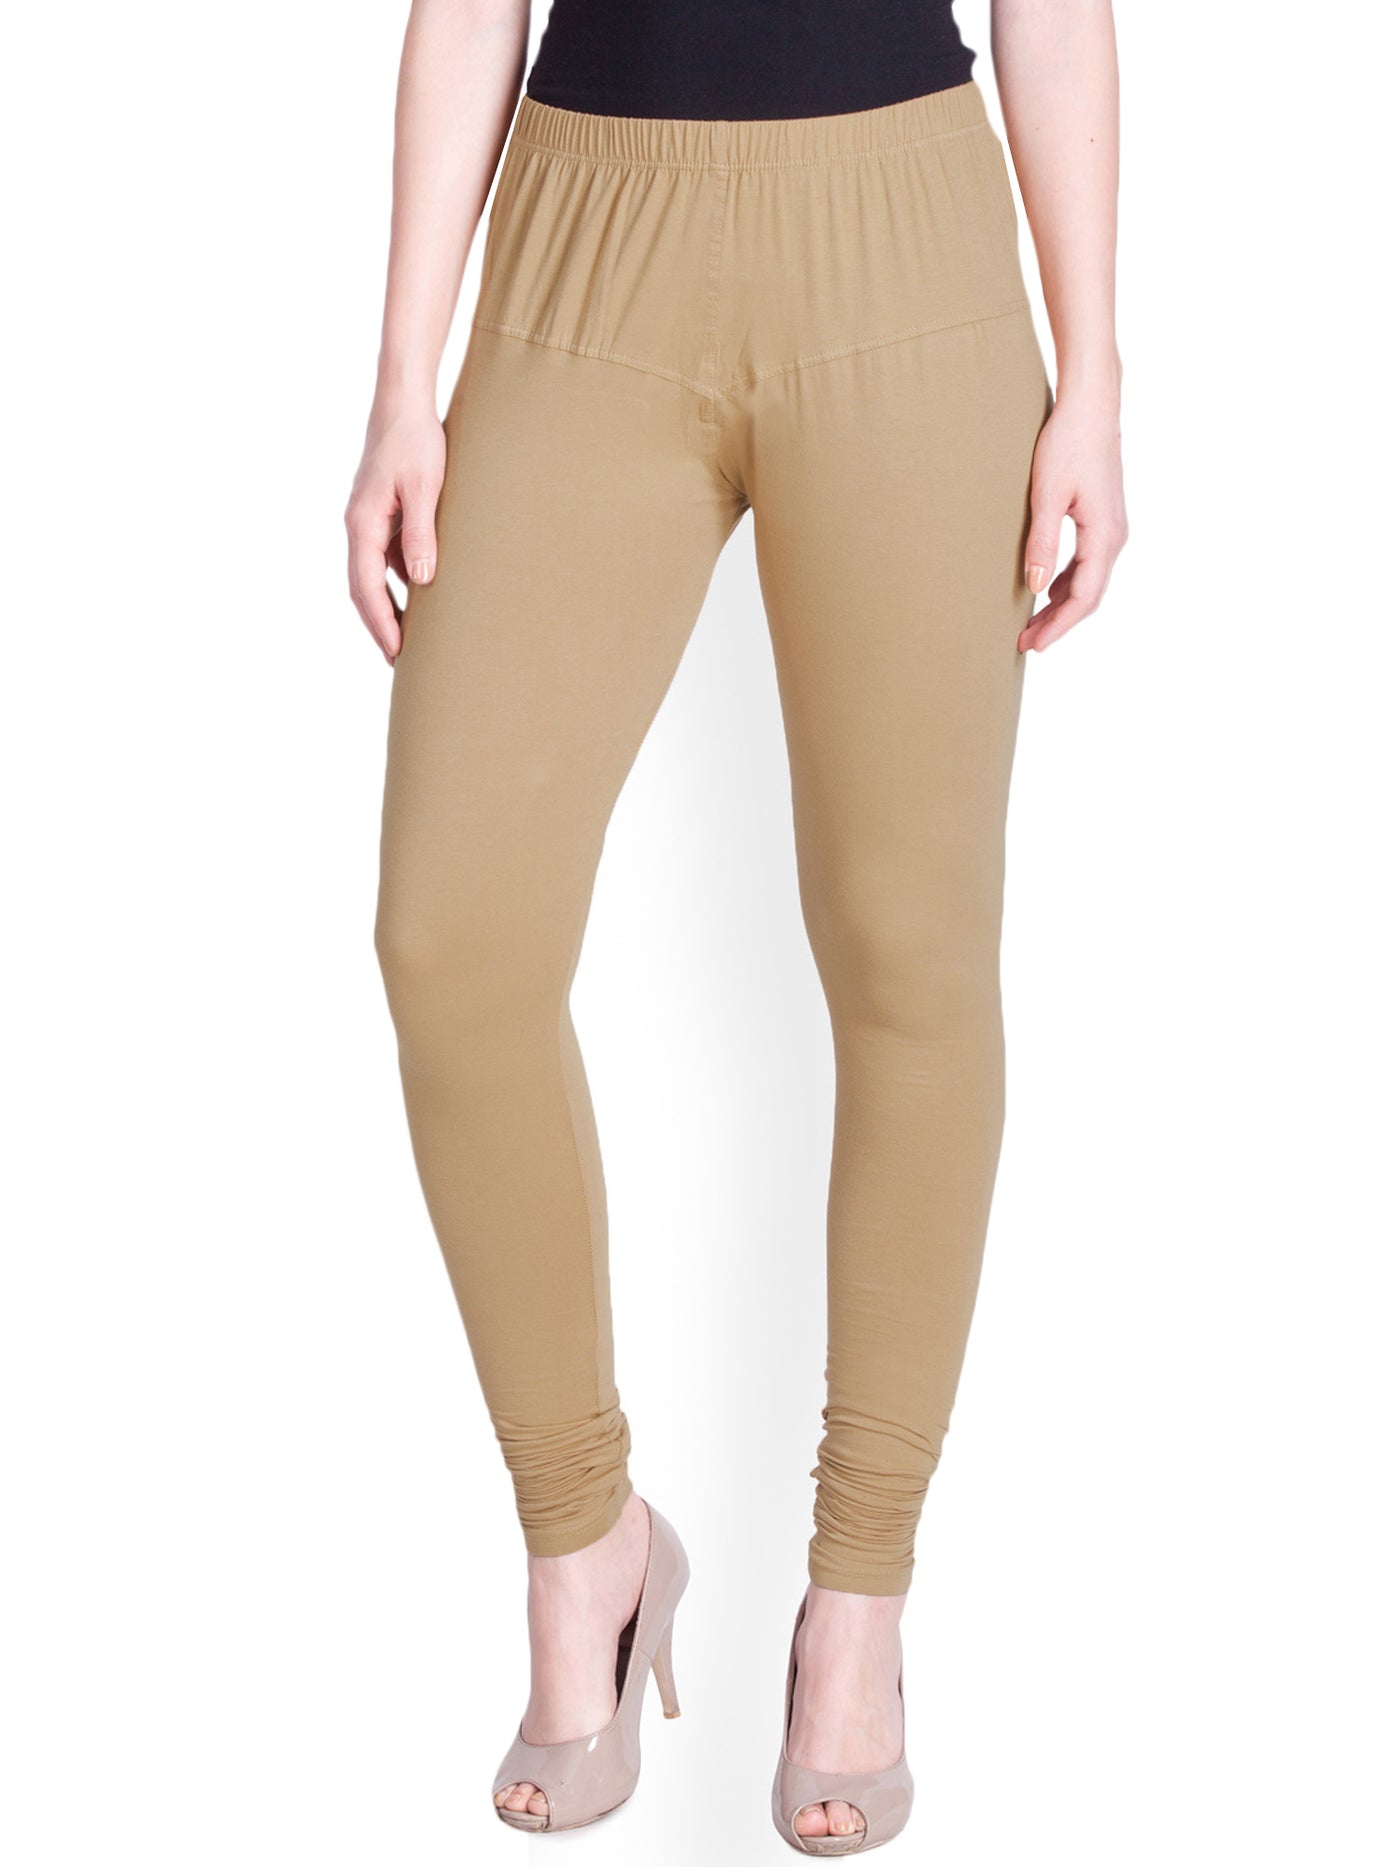 Cotton Stretch Leggings: Comfortable and Stylish for Any Occasion! –  LadyLine